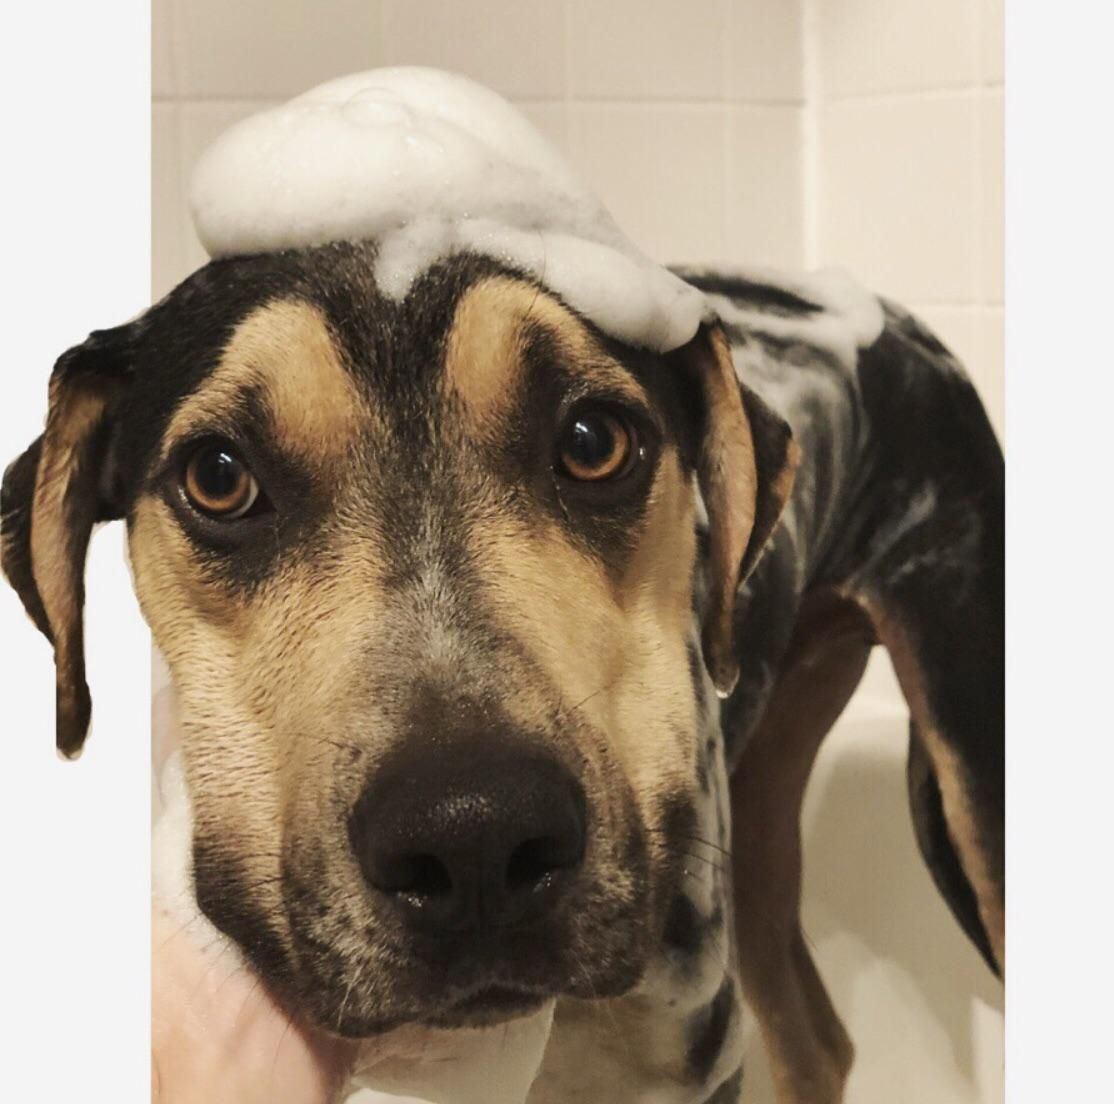 Unamused With My Bath Time Shenanigans Dogpictures Dogs Aww